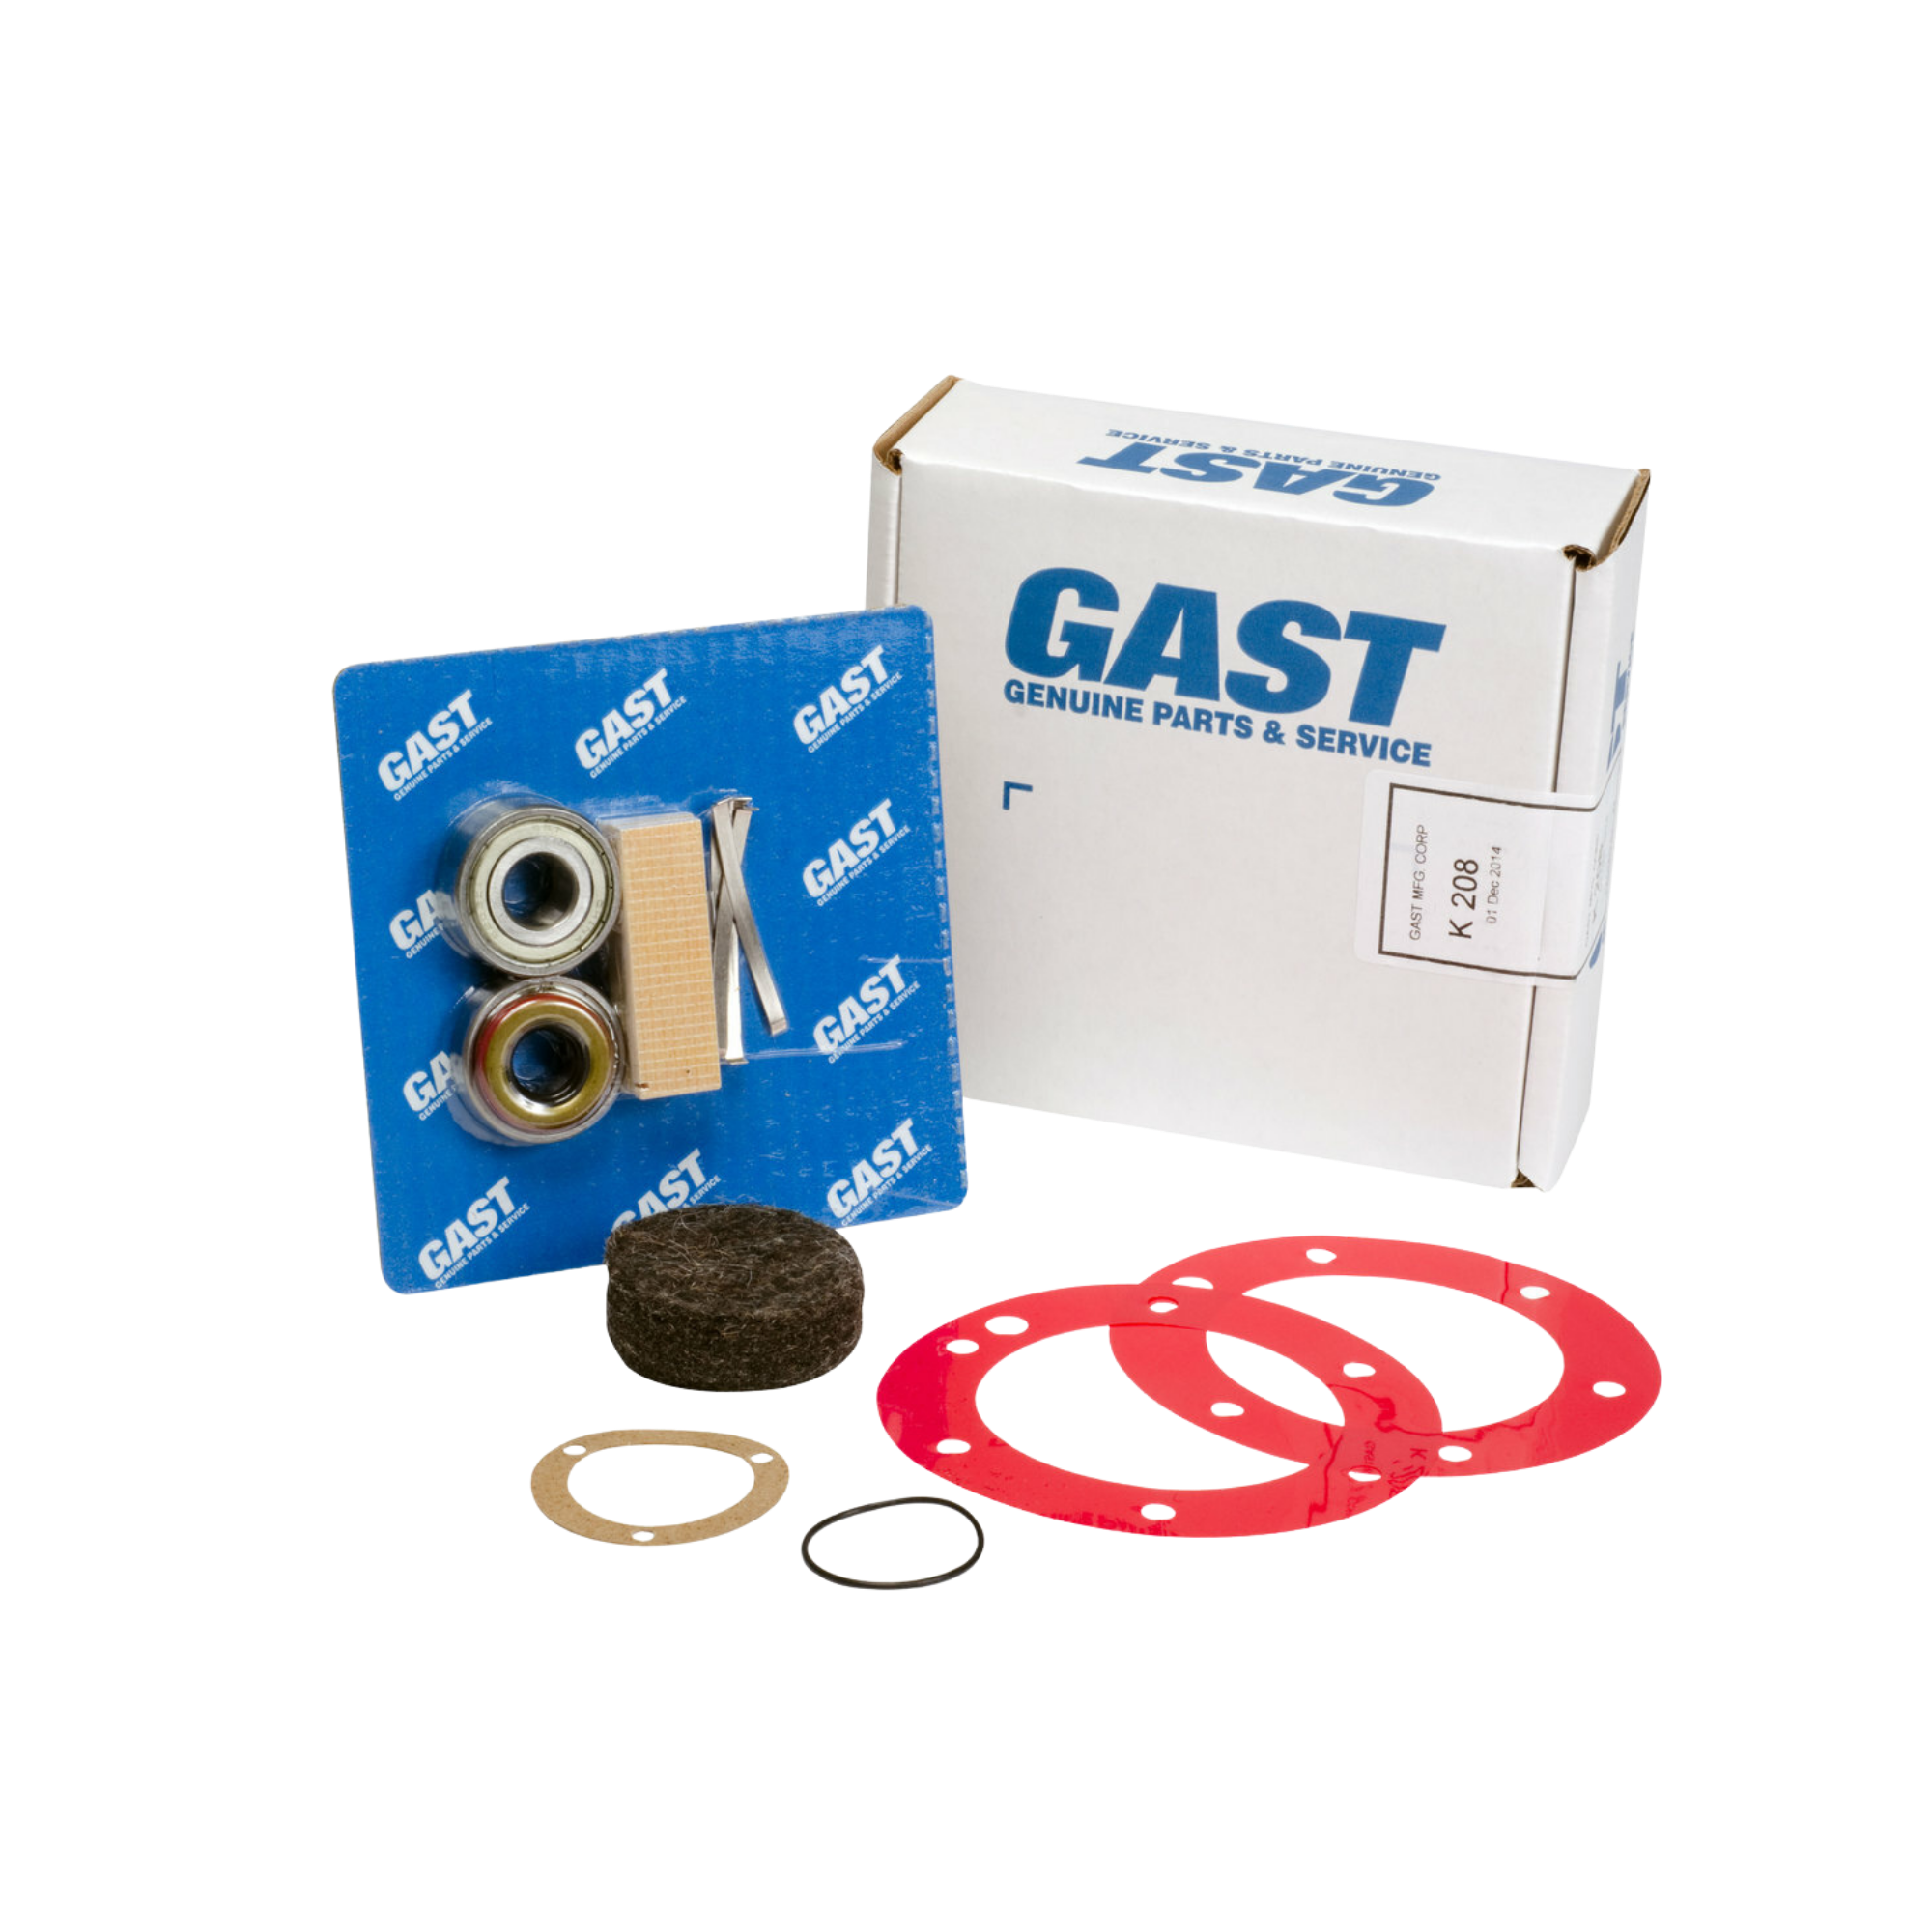 pictured is a gast service kit with bearings, seals, gaskets, a filter, and a square white Gast box